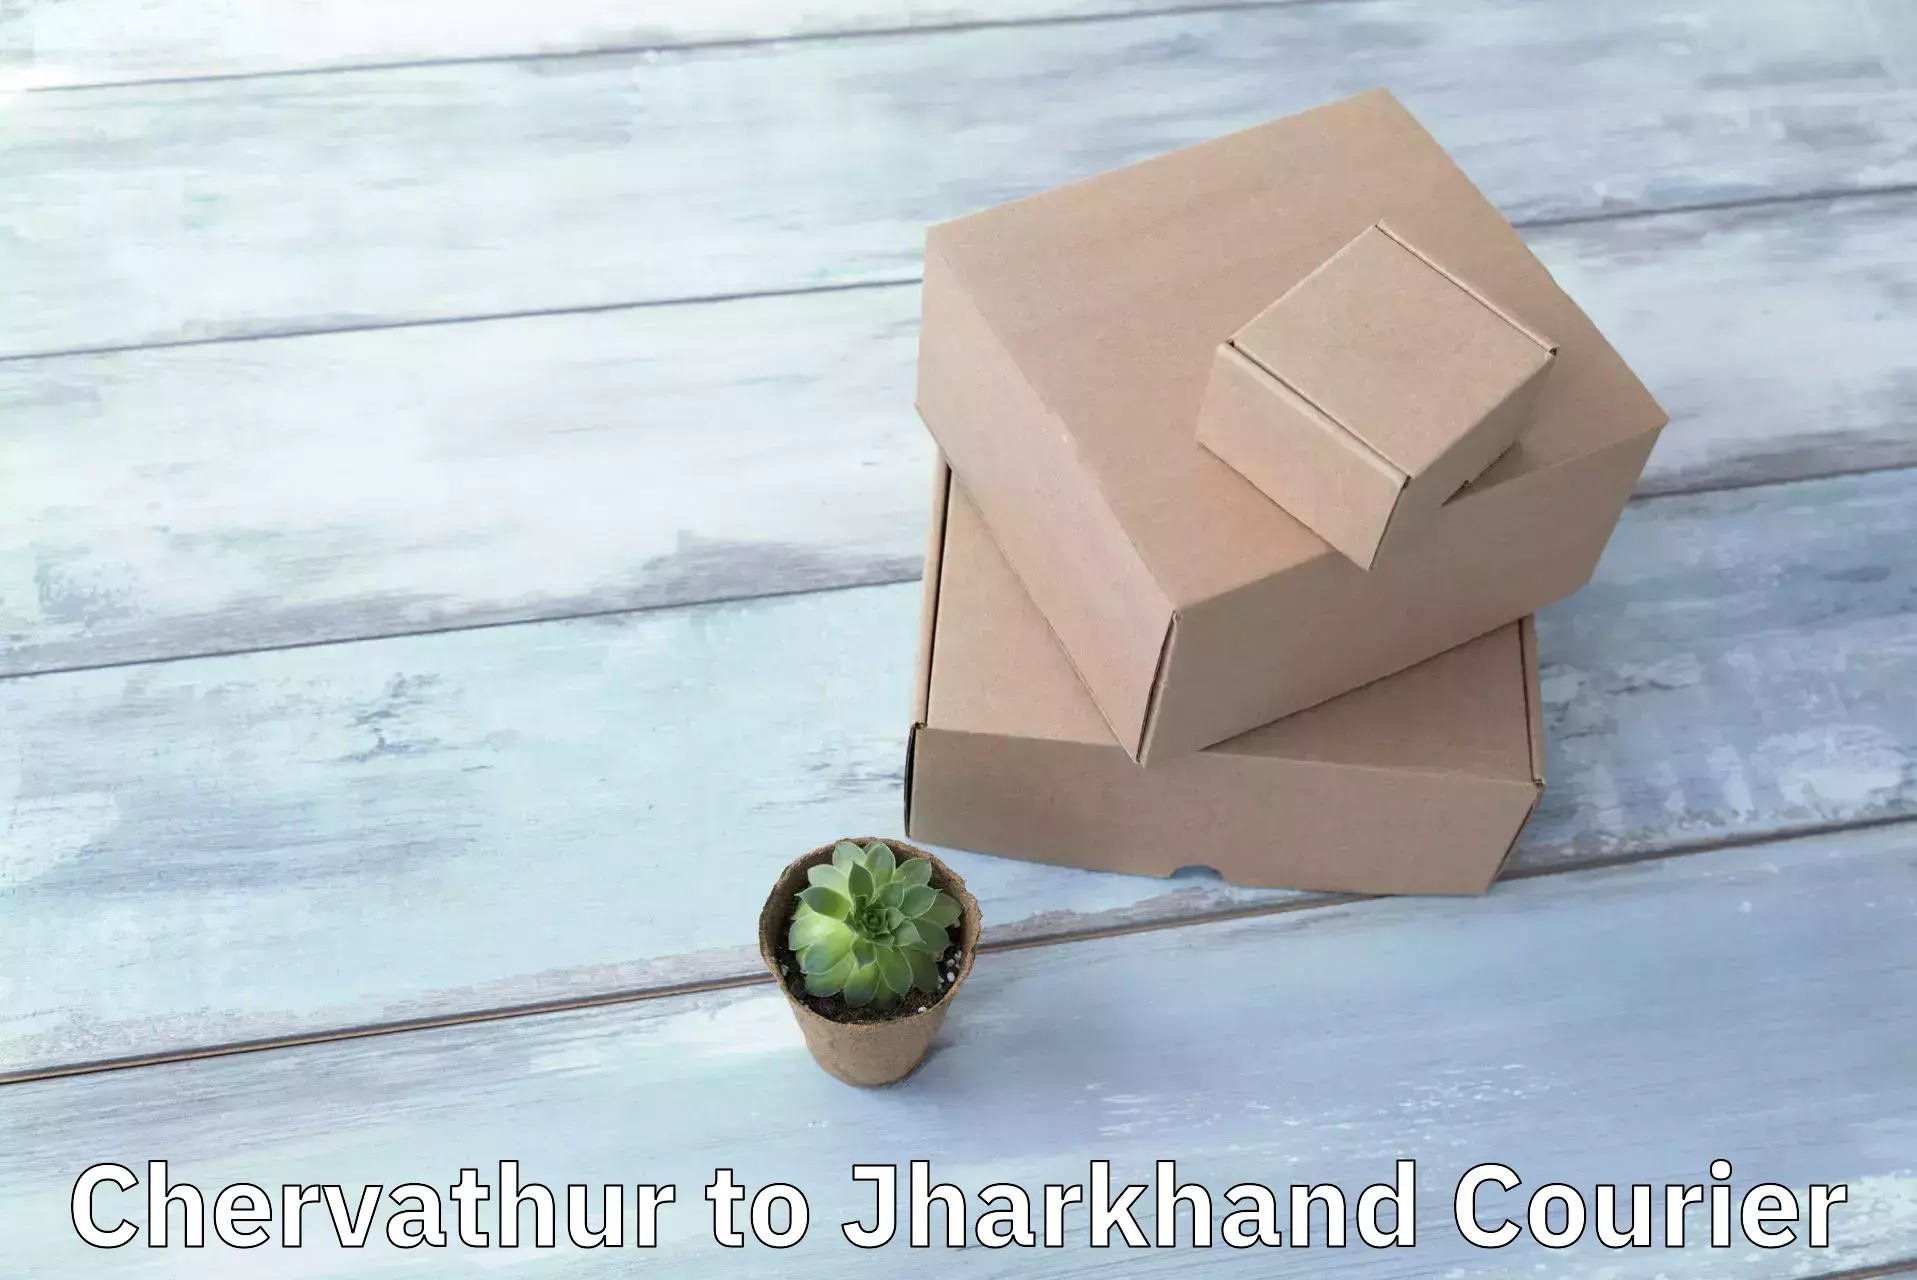 Corporate courier solutions Chervathur to Jharkhand